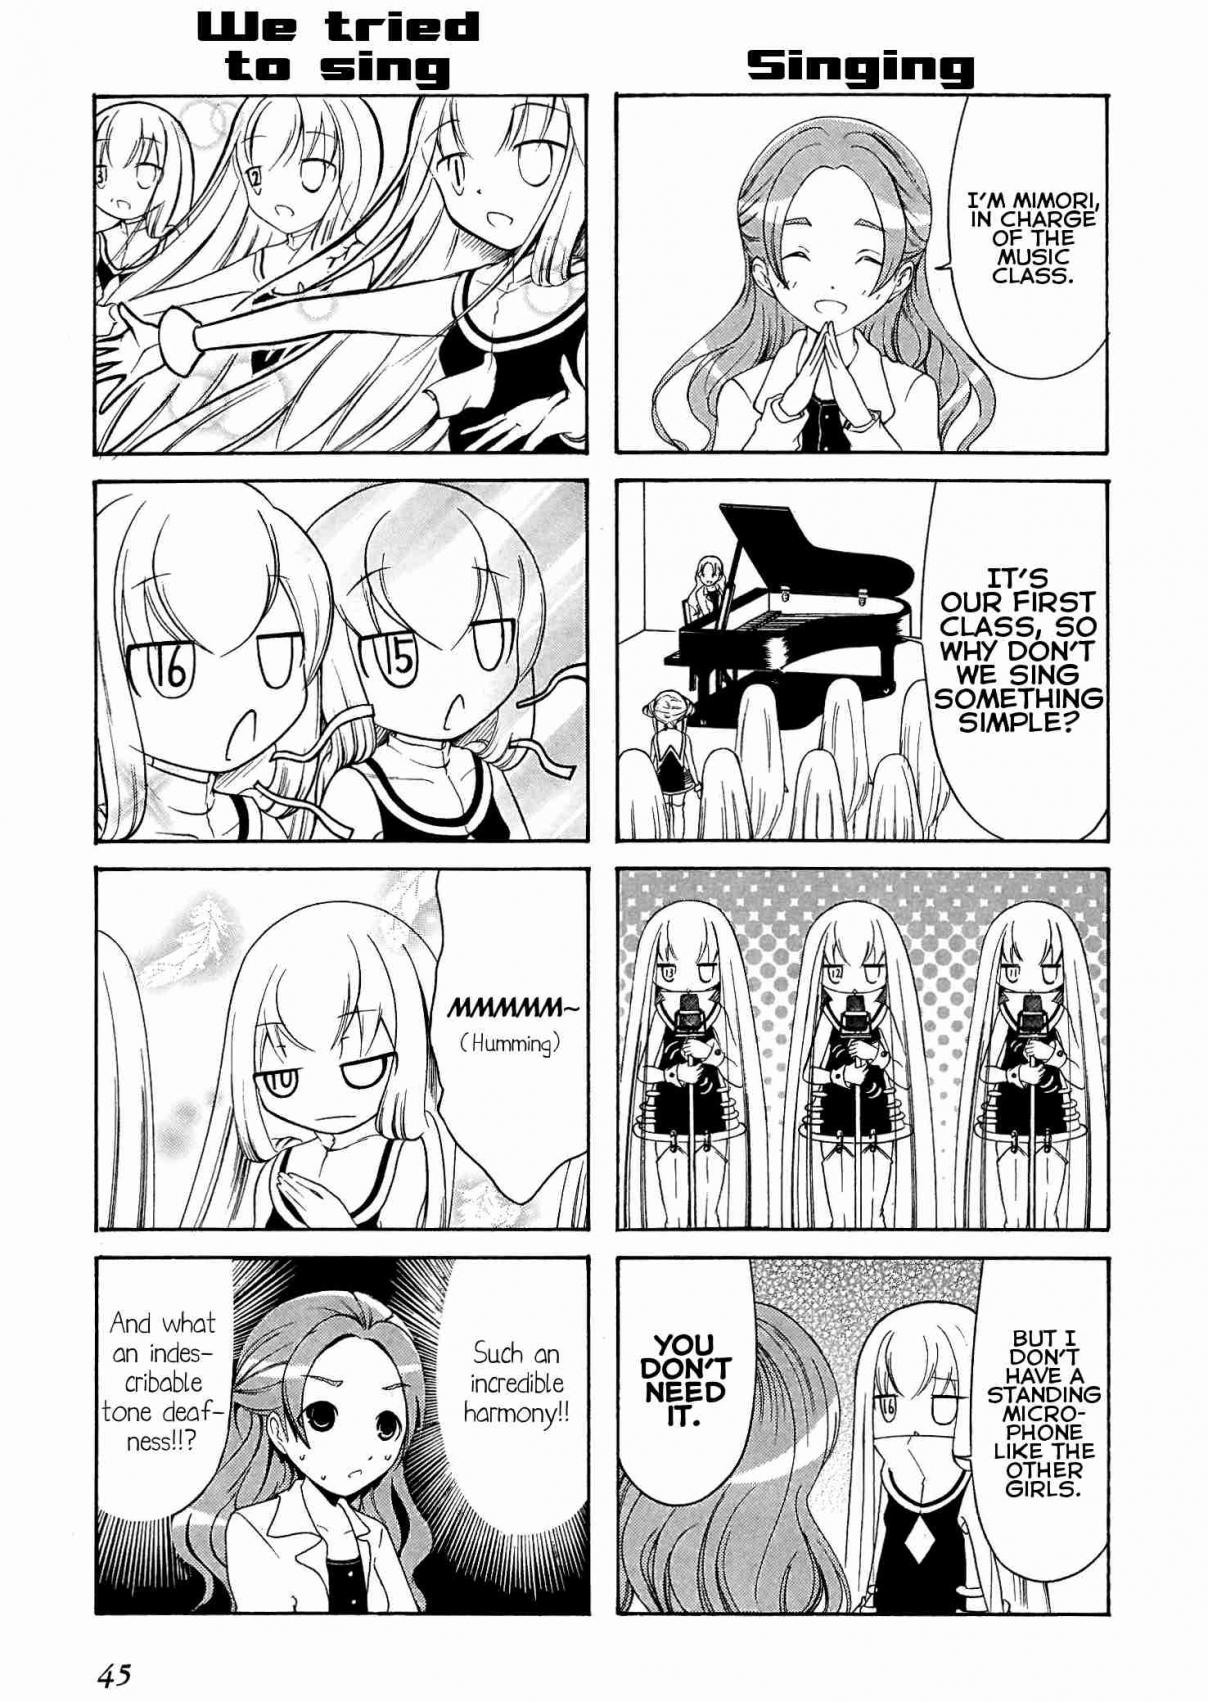 Number Girl Vol. 1 Ch. 6